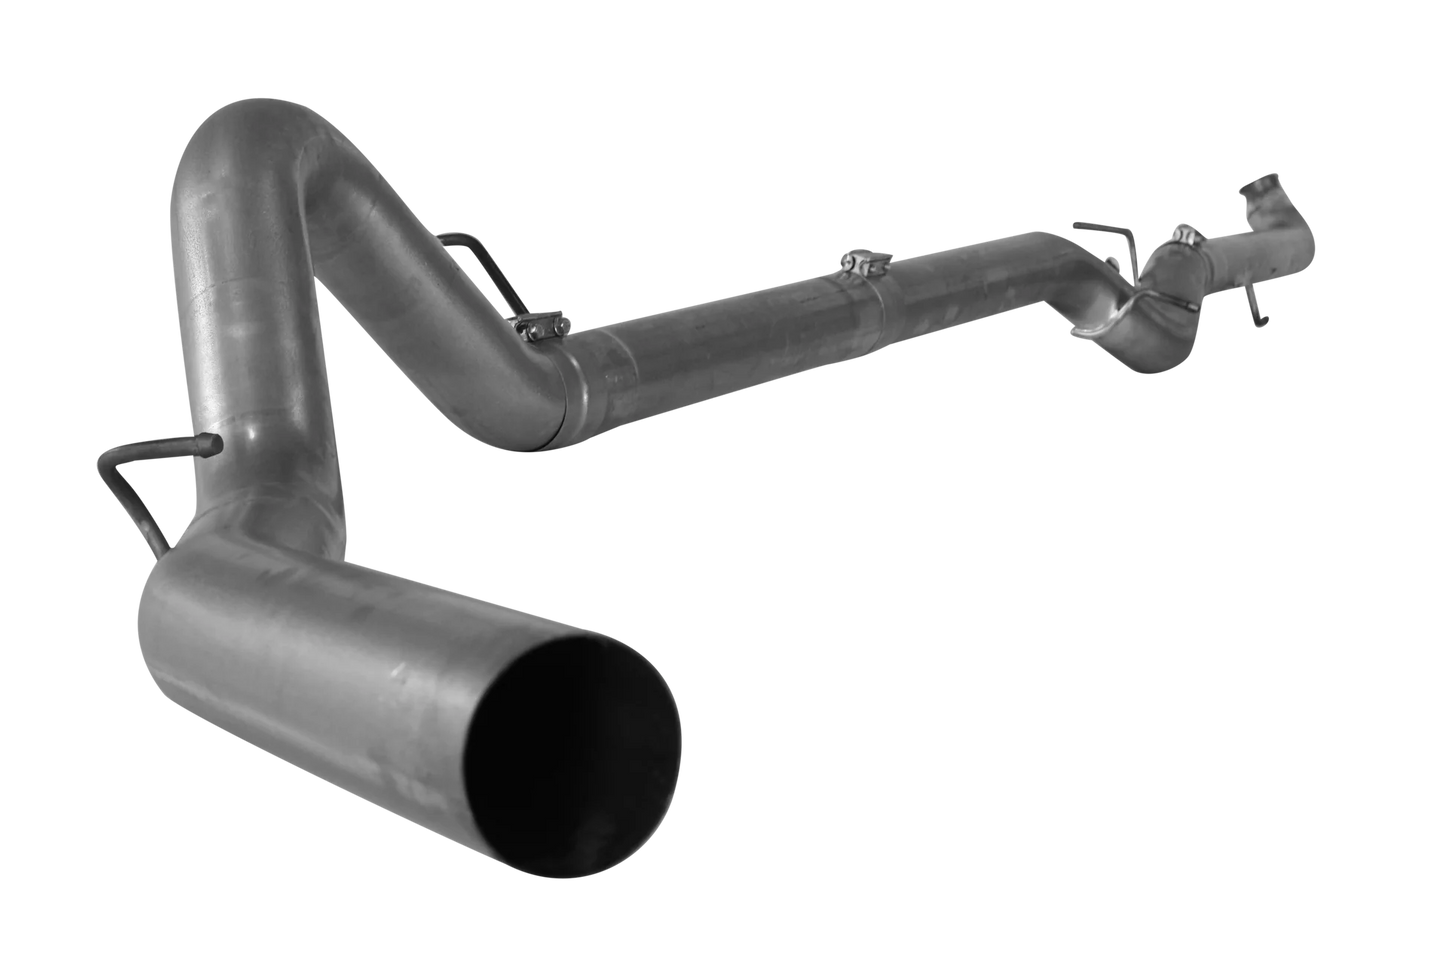 432112 432107 431112 431107 Mel's Manufacturing 4" Downpipe Back Single | 2001-2007 GM 2500/3500 6.6L DURAMAX Mels Mfg FloPro Flo-Pro Flo Pro Hell On Wheels Performance Ltd Limited Canadian Owned and Operated Online Diesel Parts Distribution & Wholesale Supply Center in Alberta Canada Shipping Supplying to Alberta British Columbia Sask Saskatchewan Manitoba Ontario Quebec Newfoundland Labrador New Brunswick Nova Scotia Prince Edward Island AB BC SK MB ON QC PQ NS NB NFLD N.L. PEI